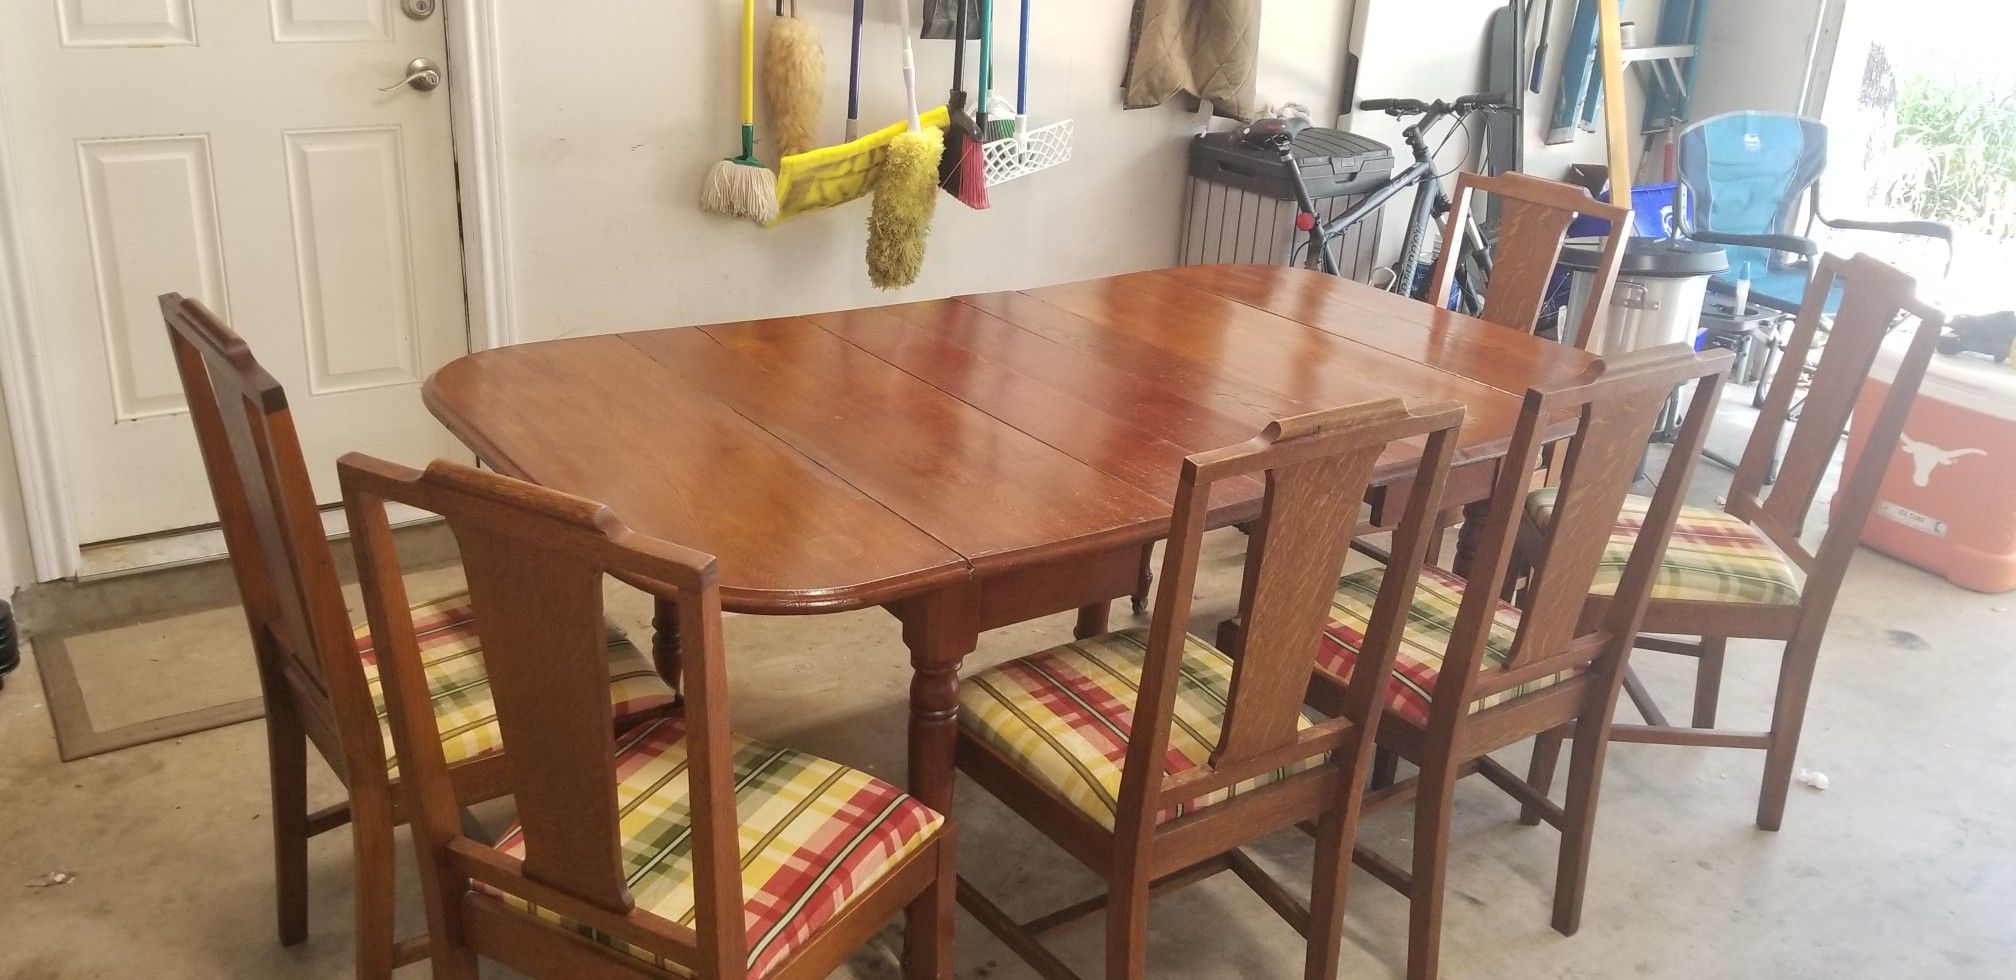 Antique Drop Leaf Table with 3 Leaves and 6 Re-Covered Antique Chairs